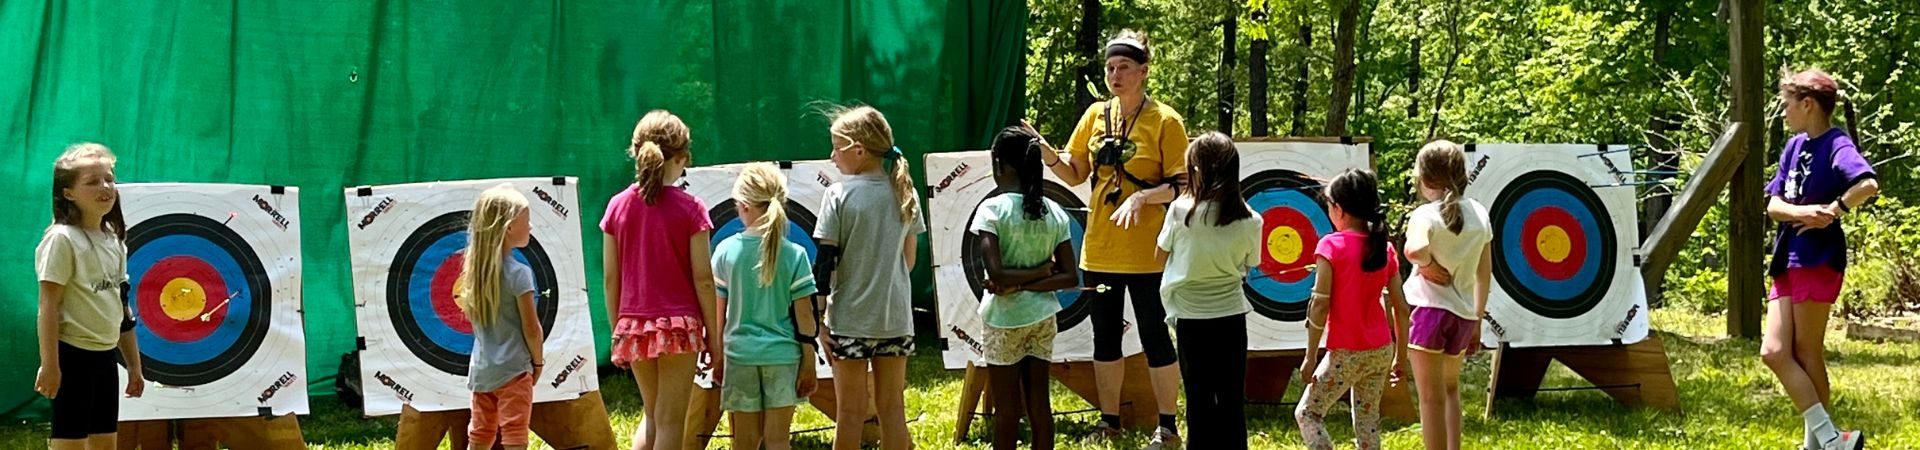  Row of girls from behind shooting bow and arrows at targets 